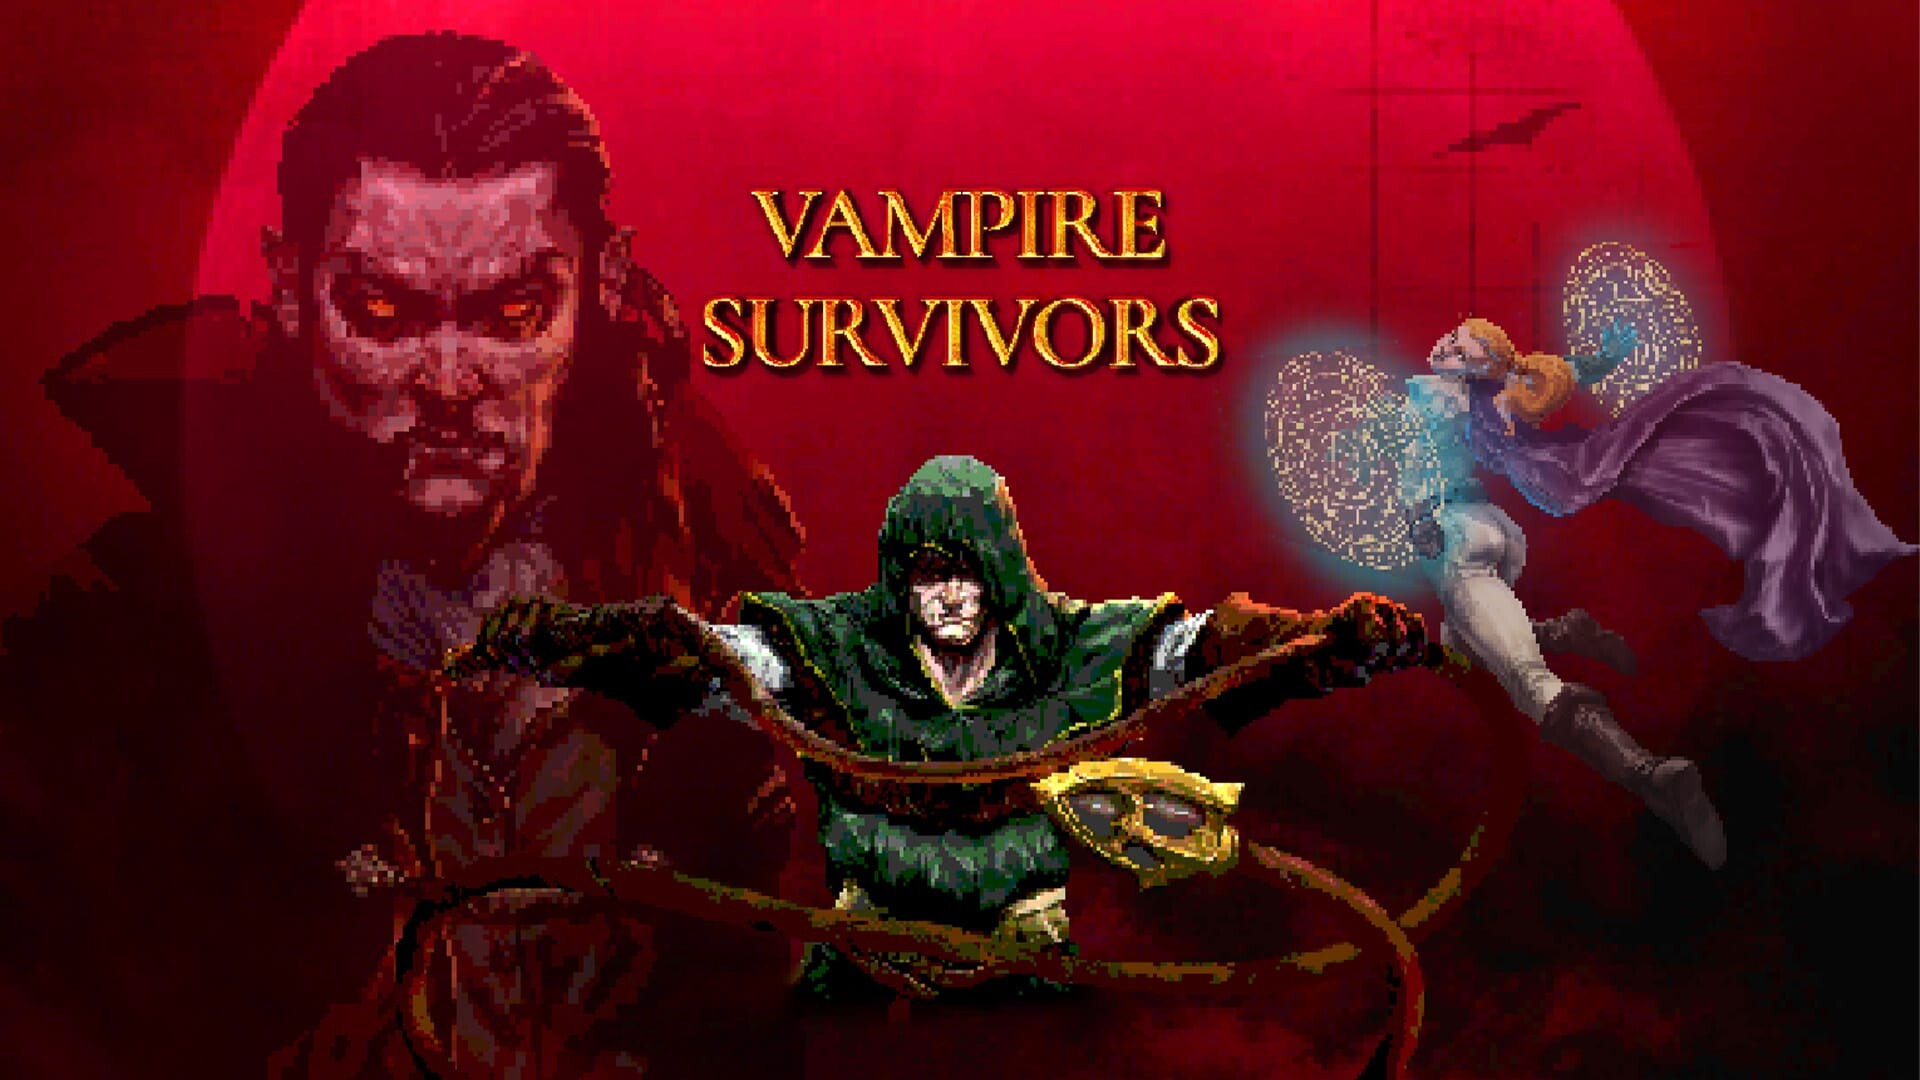 Vampire Survivors is getting four-player couch co-op so you can